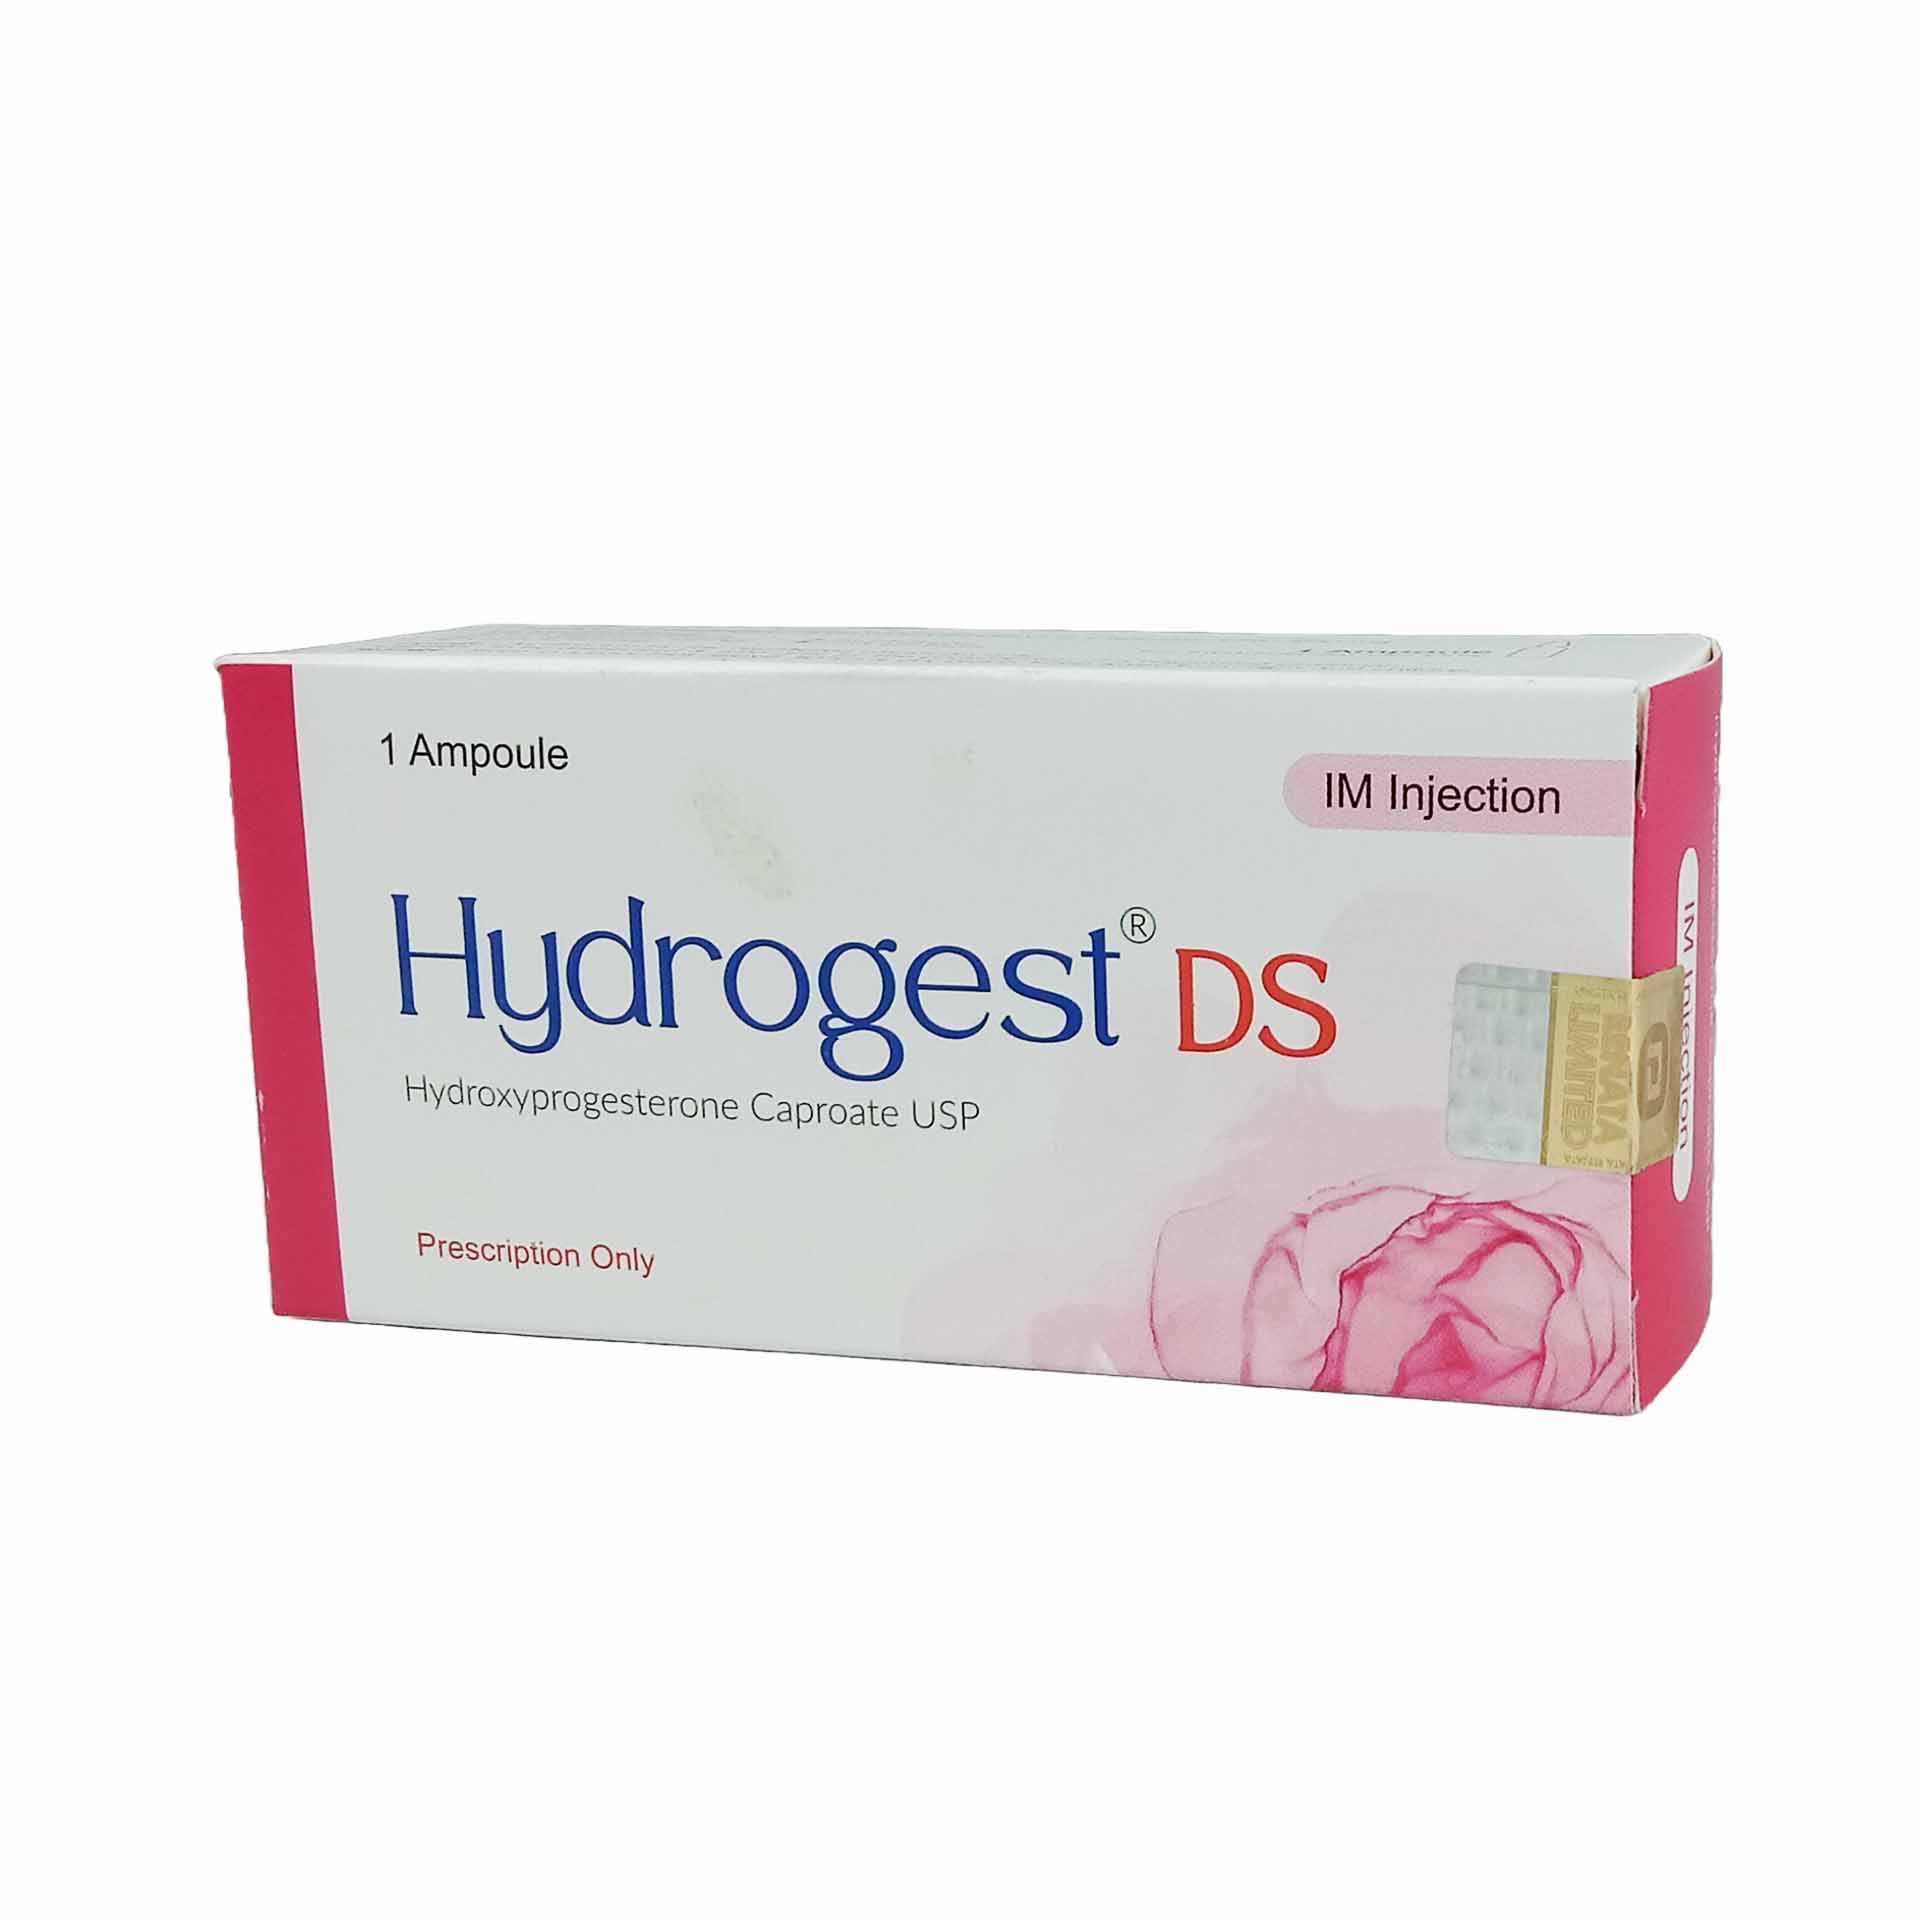 Hydrogest DS IM Injection 500mg/2ml Injection